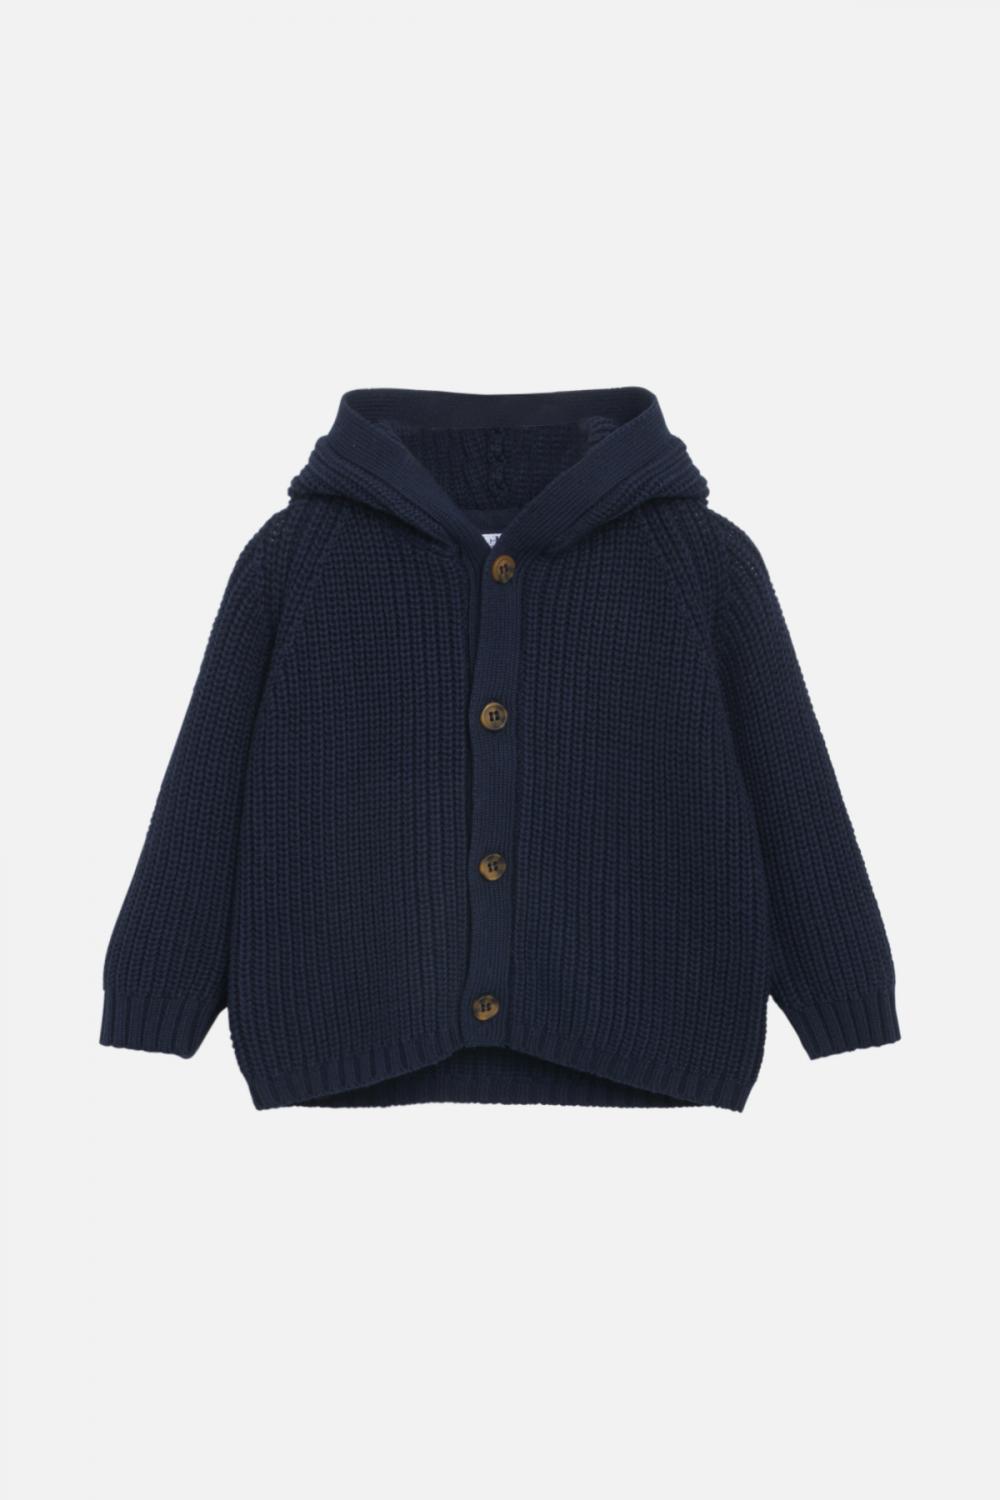 HUST&CLAIRE CARDIGAN 39331750 NAVY